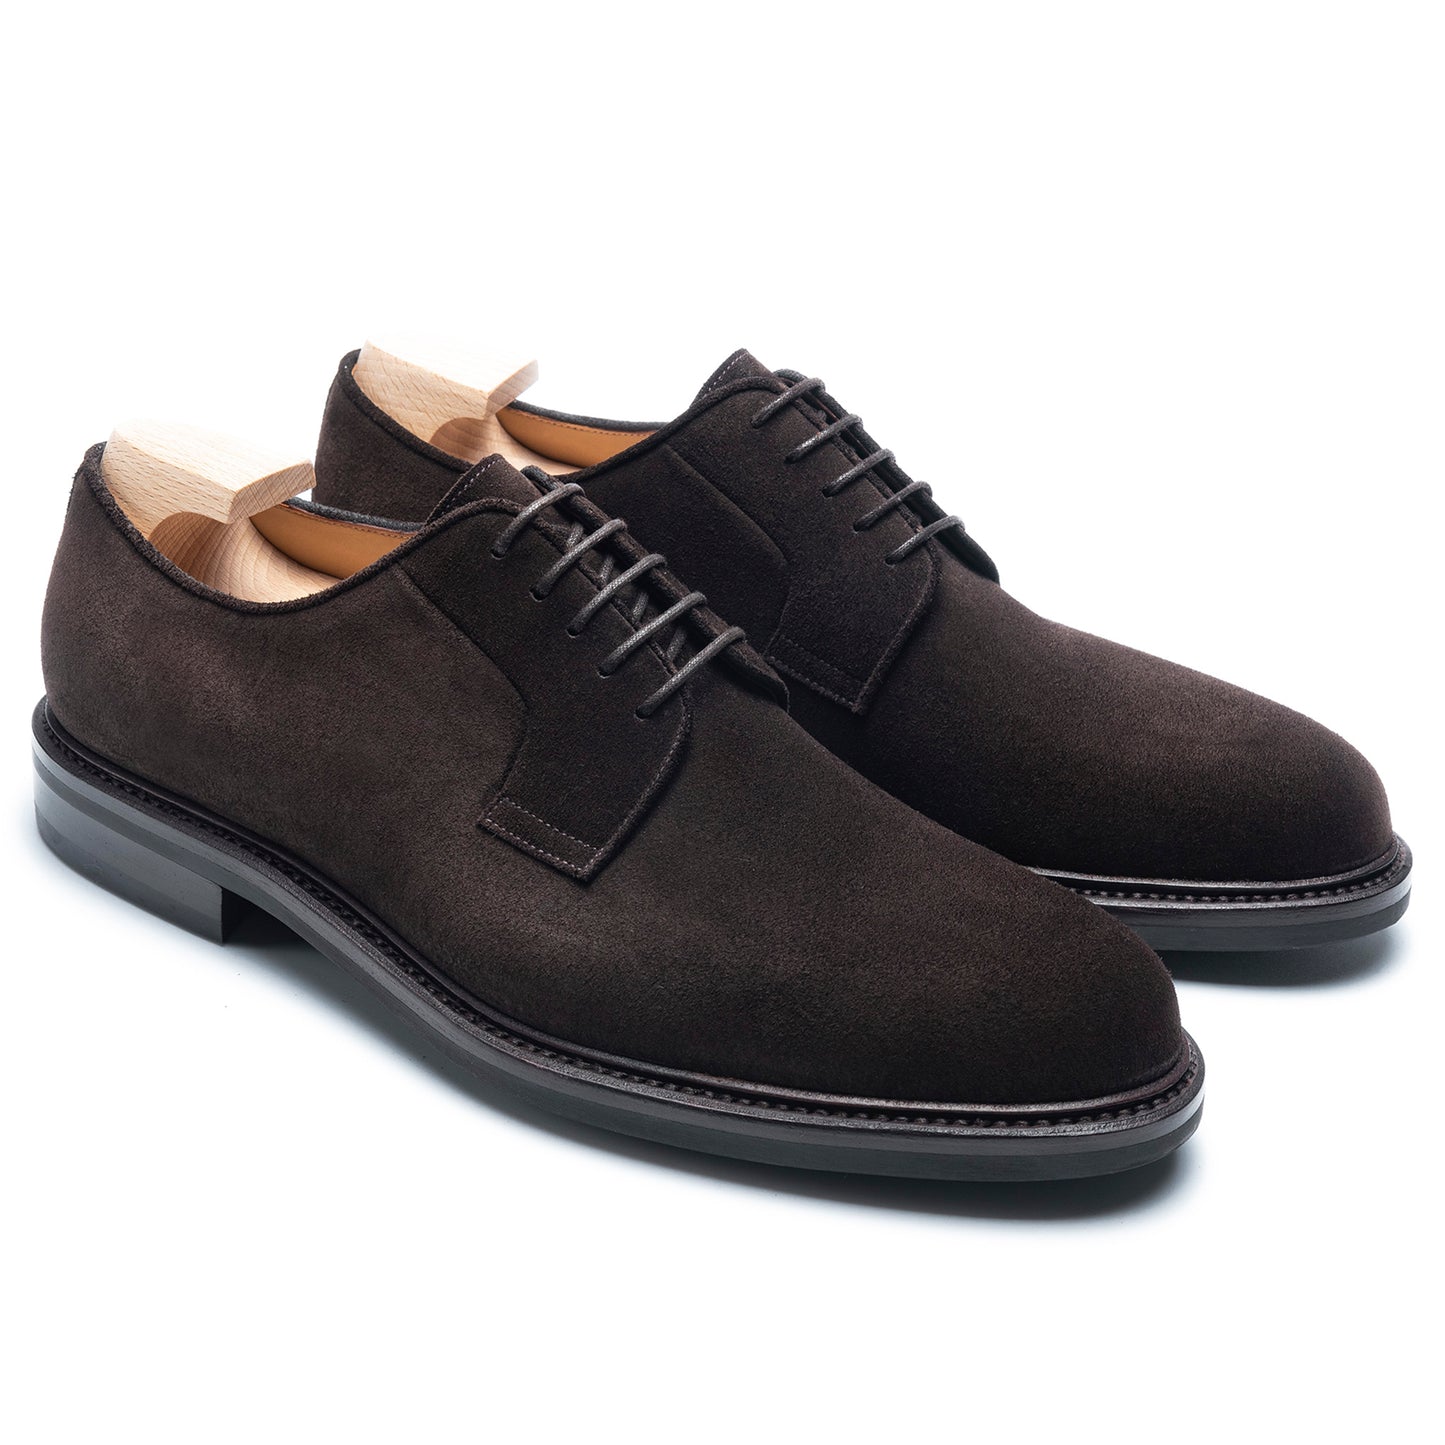 TLB Mallorca leather shoes 678 / MADISON / ANTE BROWN